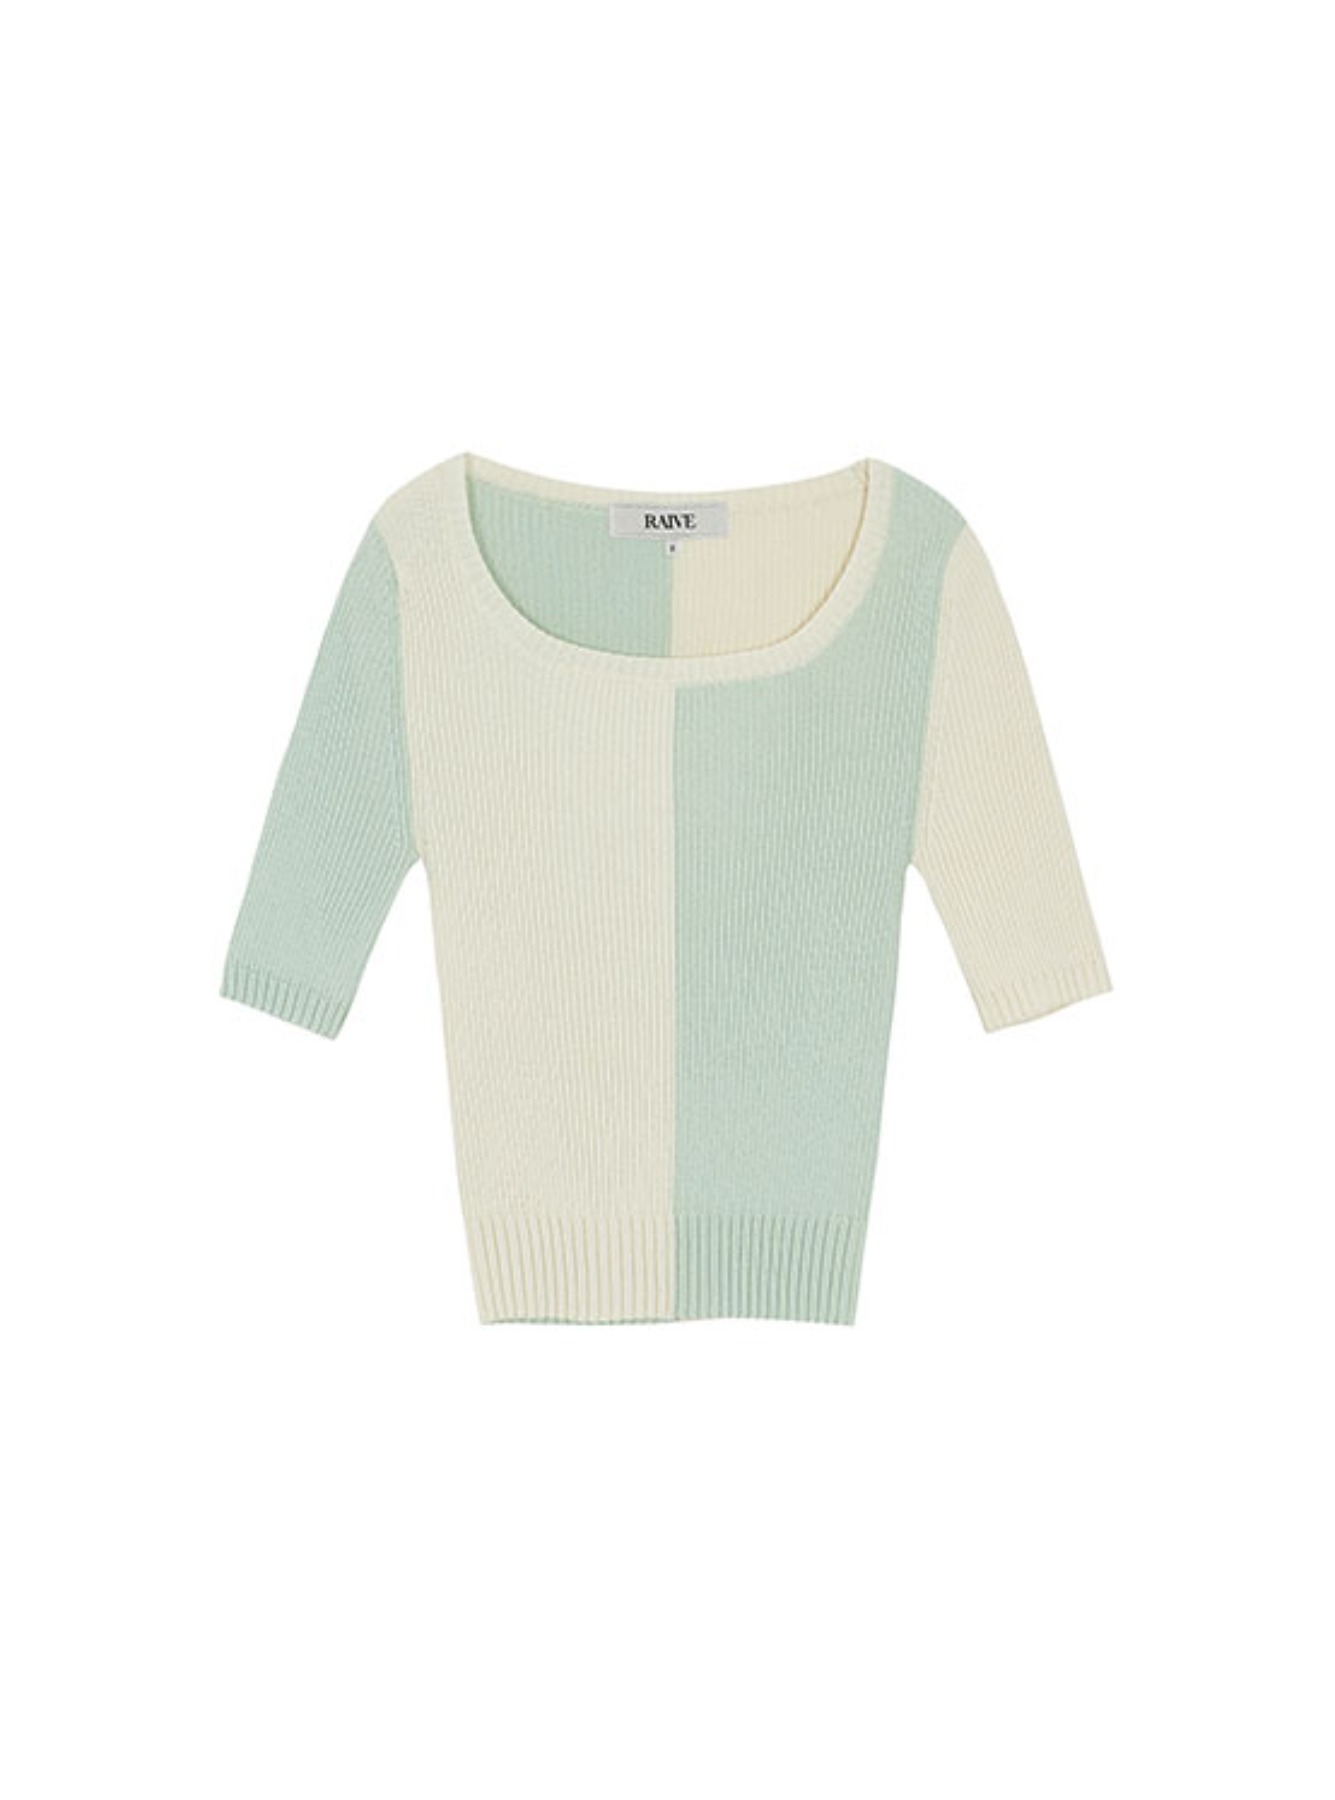 Two Tone knit Top in Mint VK2MP147-31